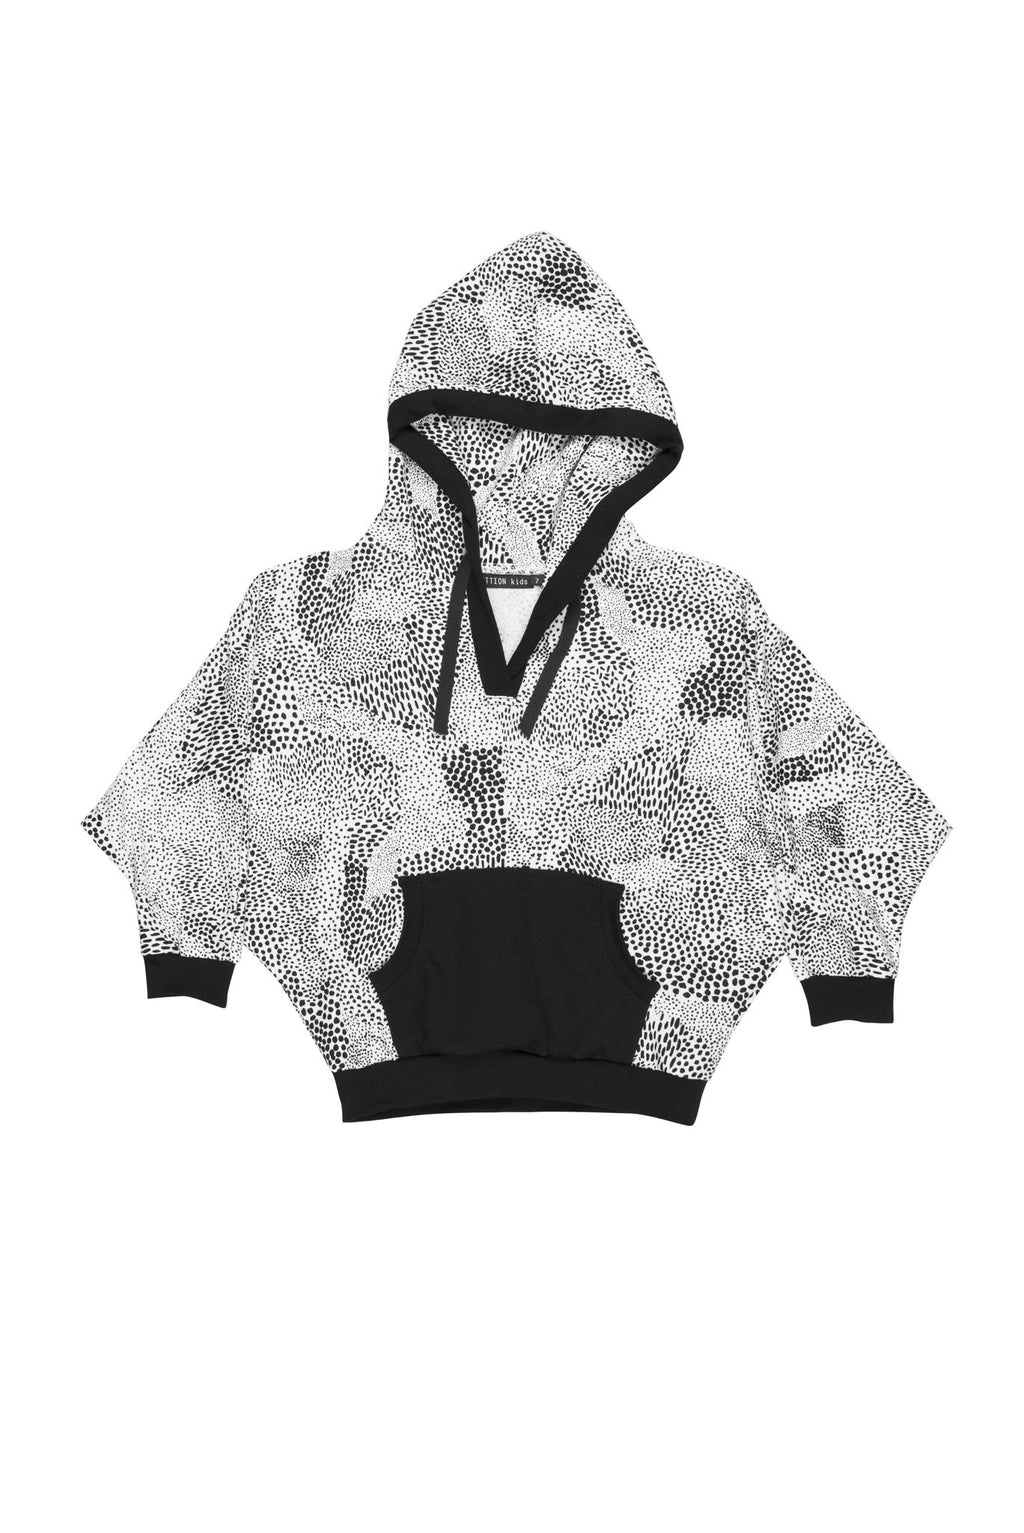 Bat Wing Abstract Sweater Hoodie - Zuttion